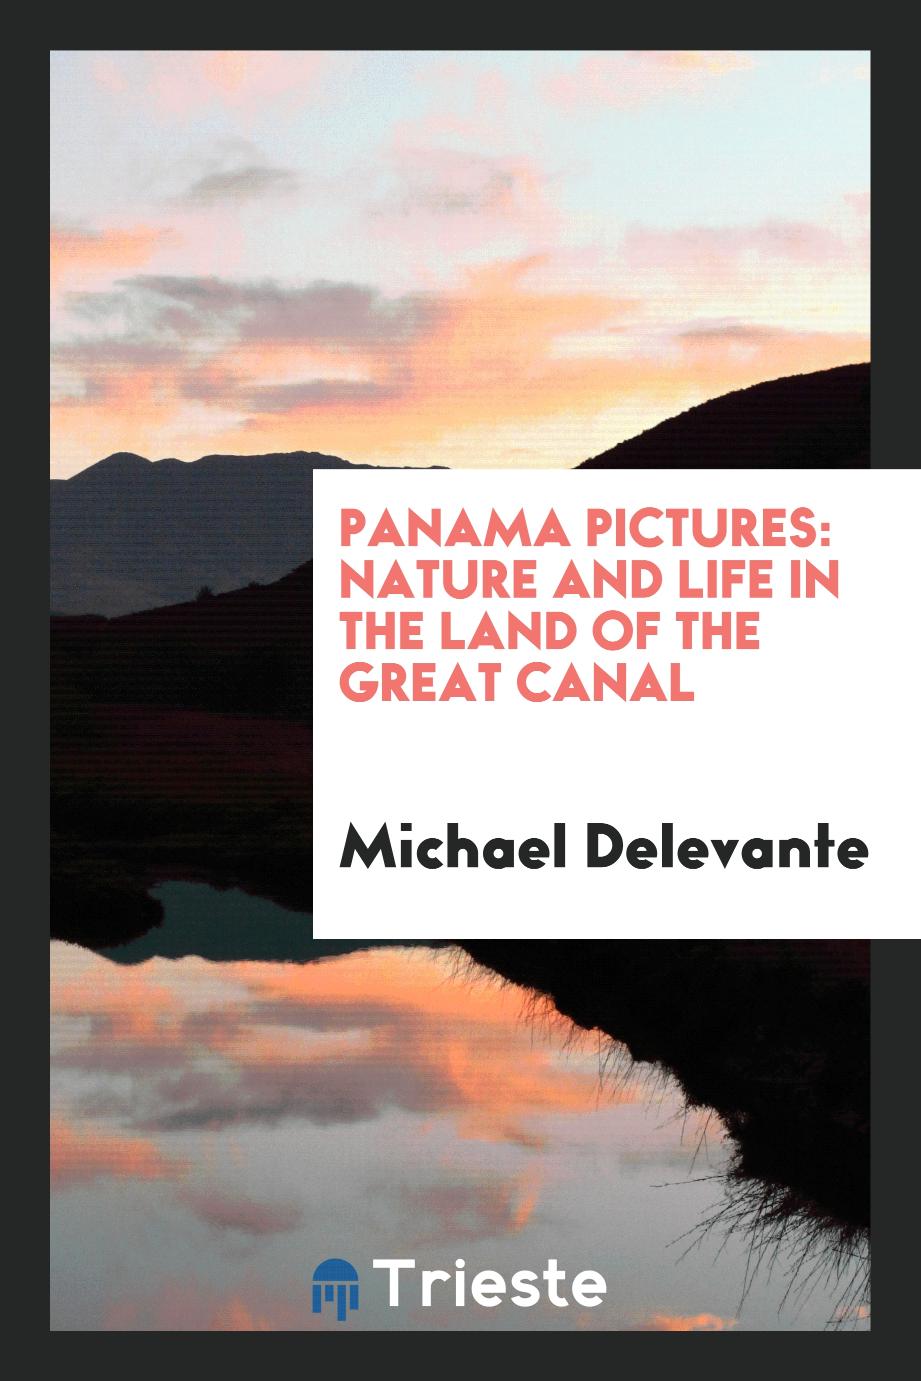 Panama pictures: nature and life in the land of the great canal